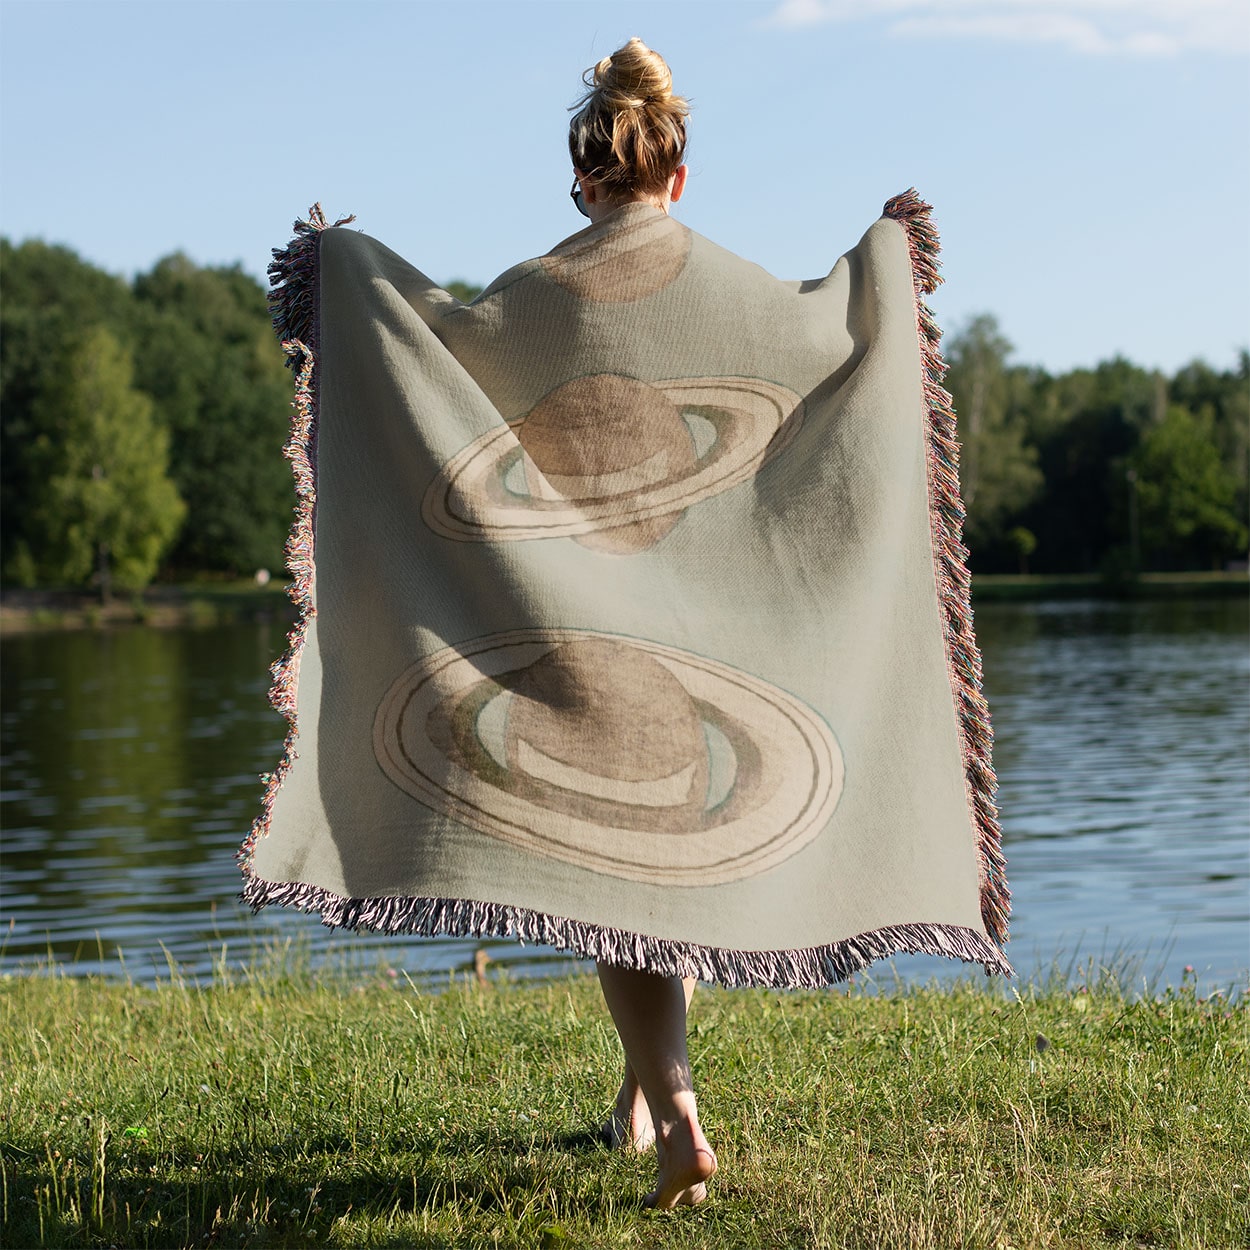 The Rings of Saturn Woven Blanket Held on a Woman's Back Outside